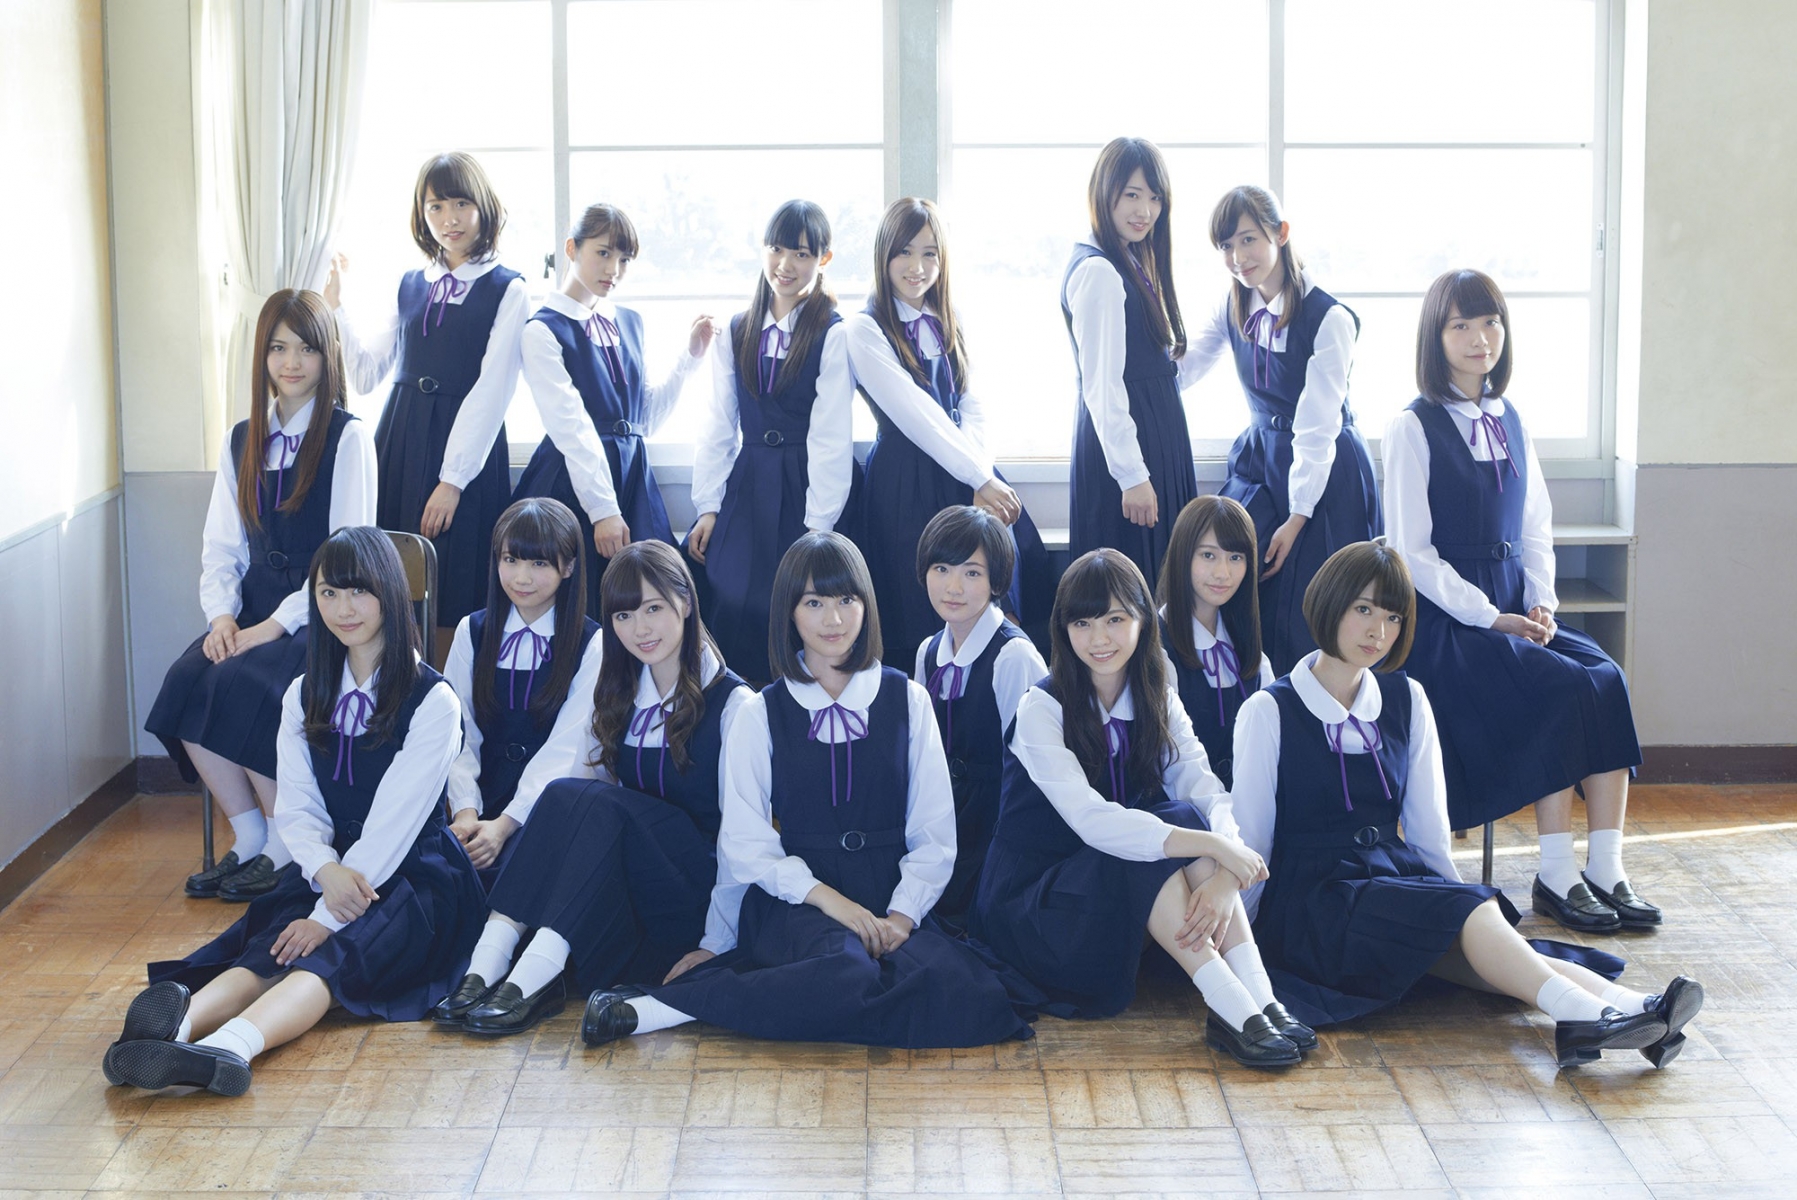 Nogizaka46’s First Documentary Film to be released in theaters Next Year!